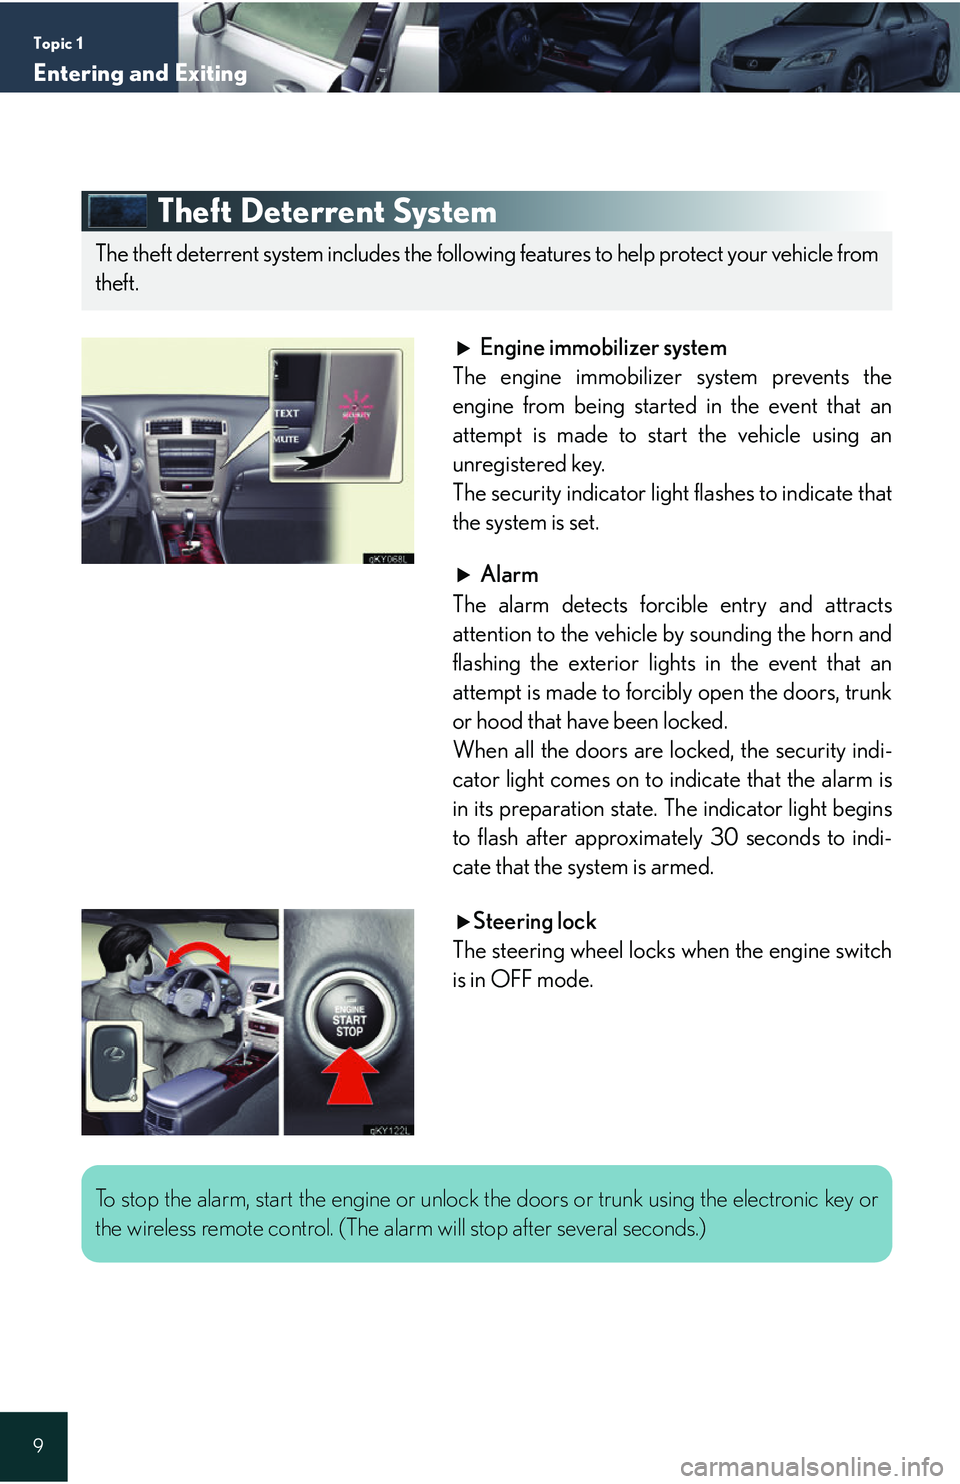 Lexus IS250 2006  Using the audio system / LEXUS 2006 IS350/250 QUICK REFERENCE GUIDE Topic 1
Entering and Exiting
9
Theft Deterrent System
Engine immobilizer system
The engine immobilizer system prevents the
engine from being started in the event that an
attempt is made to start the v